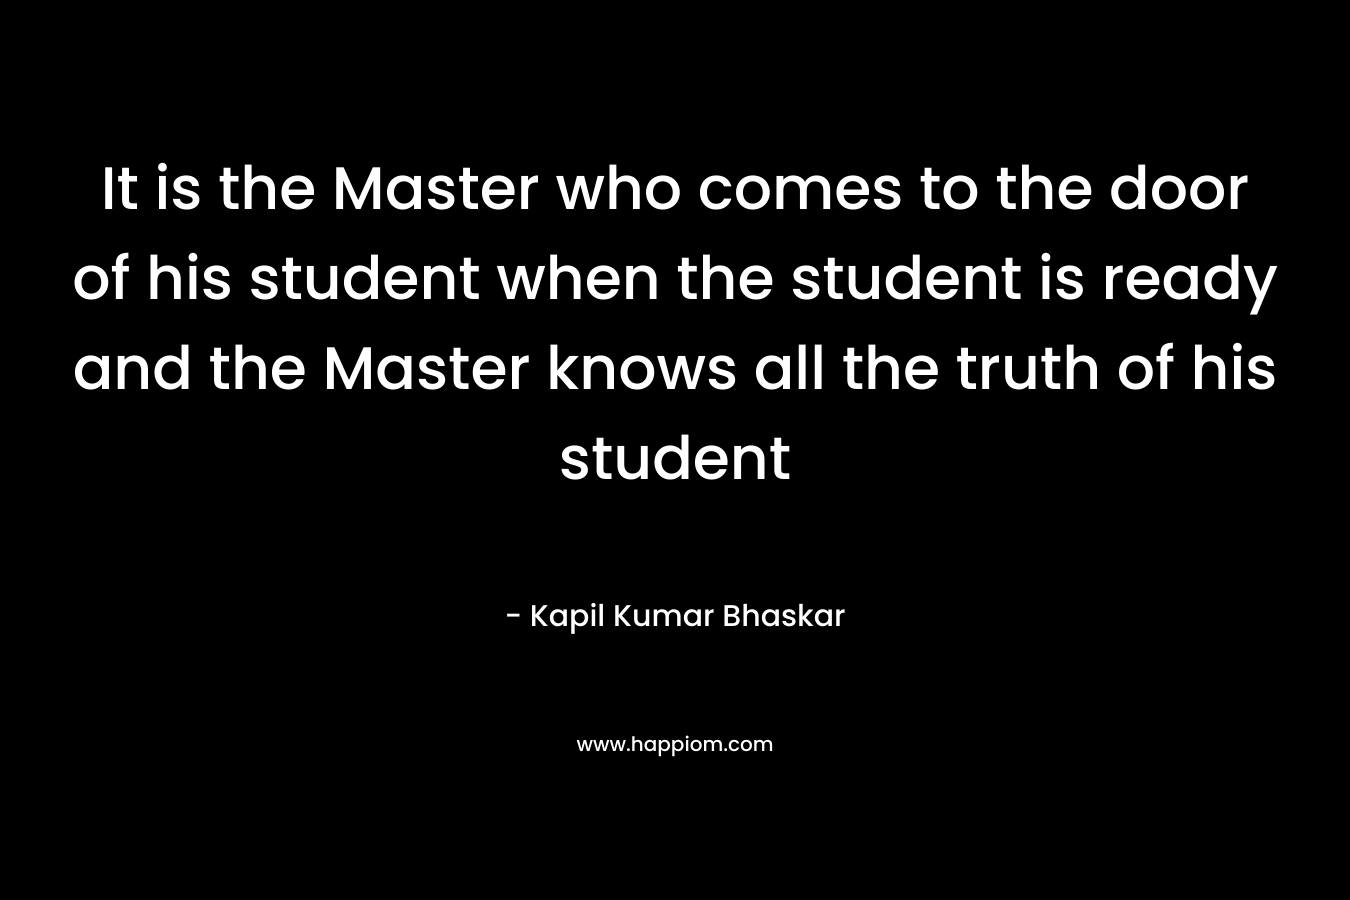 It is the Master who comes to the door of his student when the student is ready and the Master knows all the truth of his student